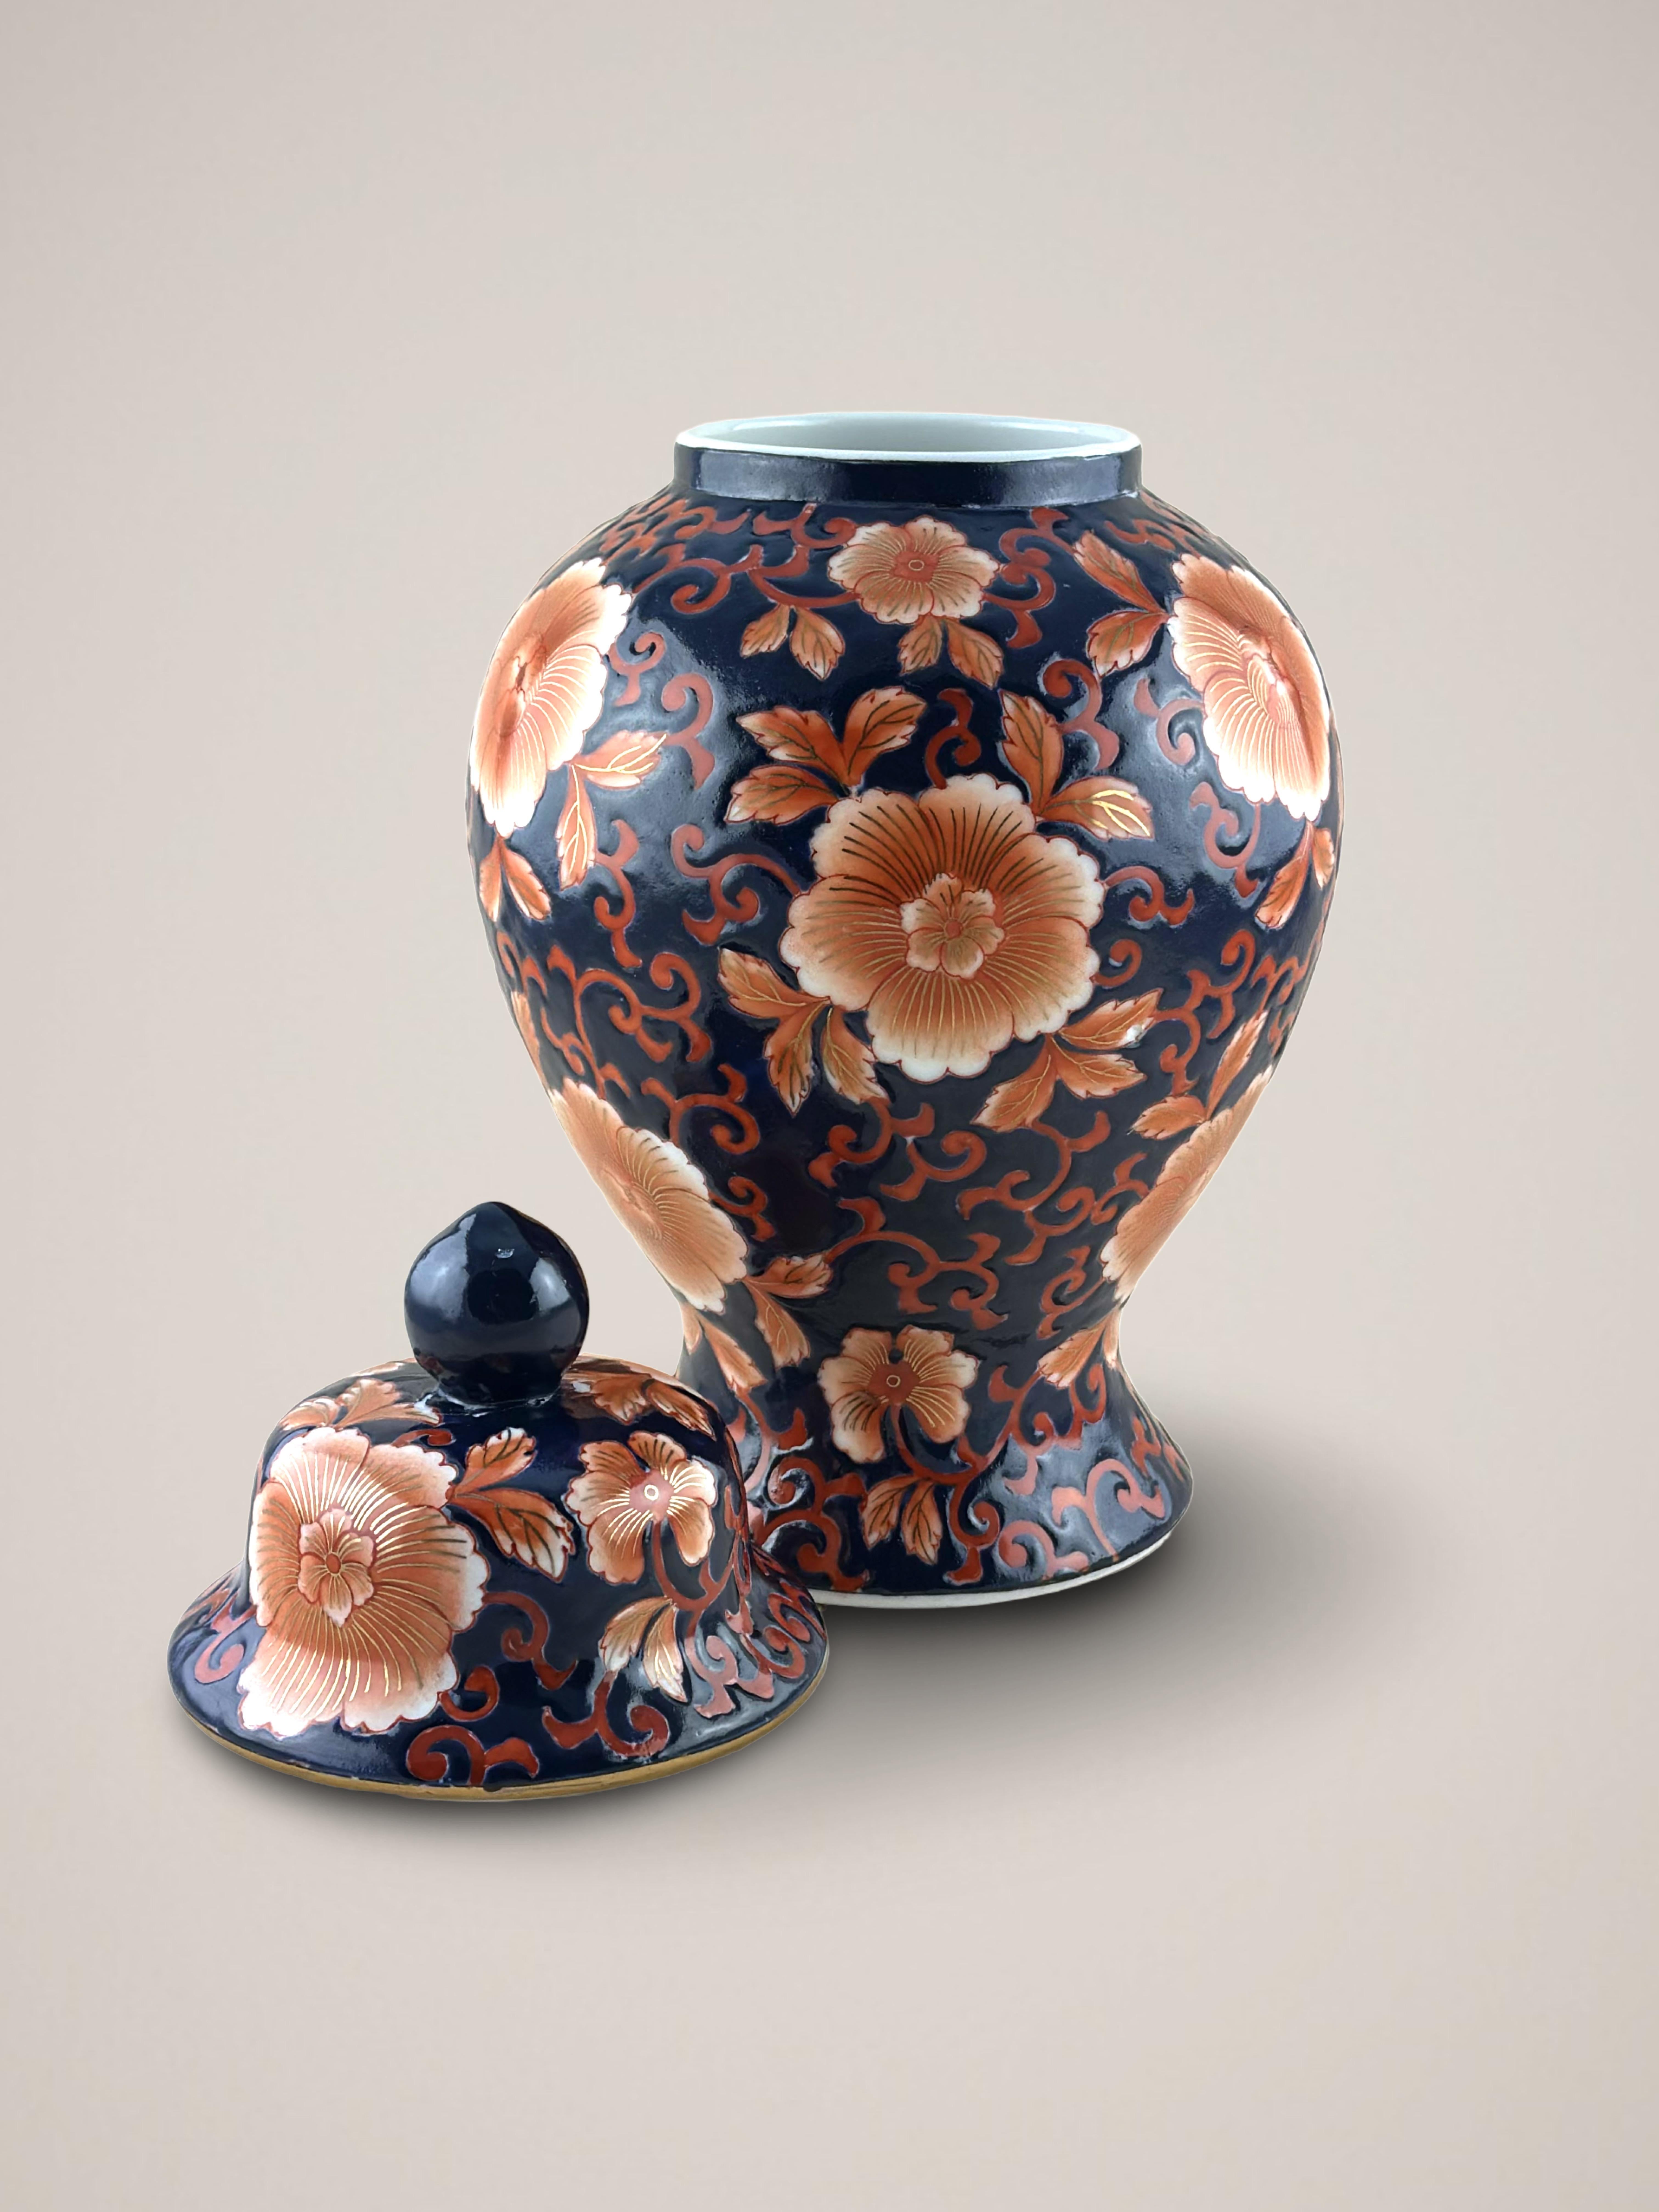 A large vintage Chinese temple jar, handcrafted in China during the 1980s.

Hand-decorated and enameled with an Imari-style design, inspired by Qianlong-era porcelain. The jar's body is finely embellished and hand-painted with a sea of underglaze